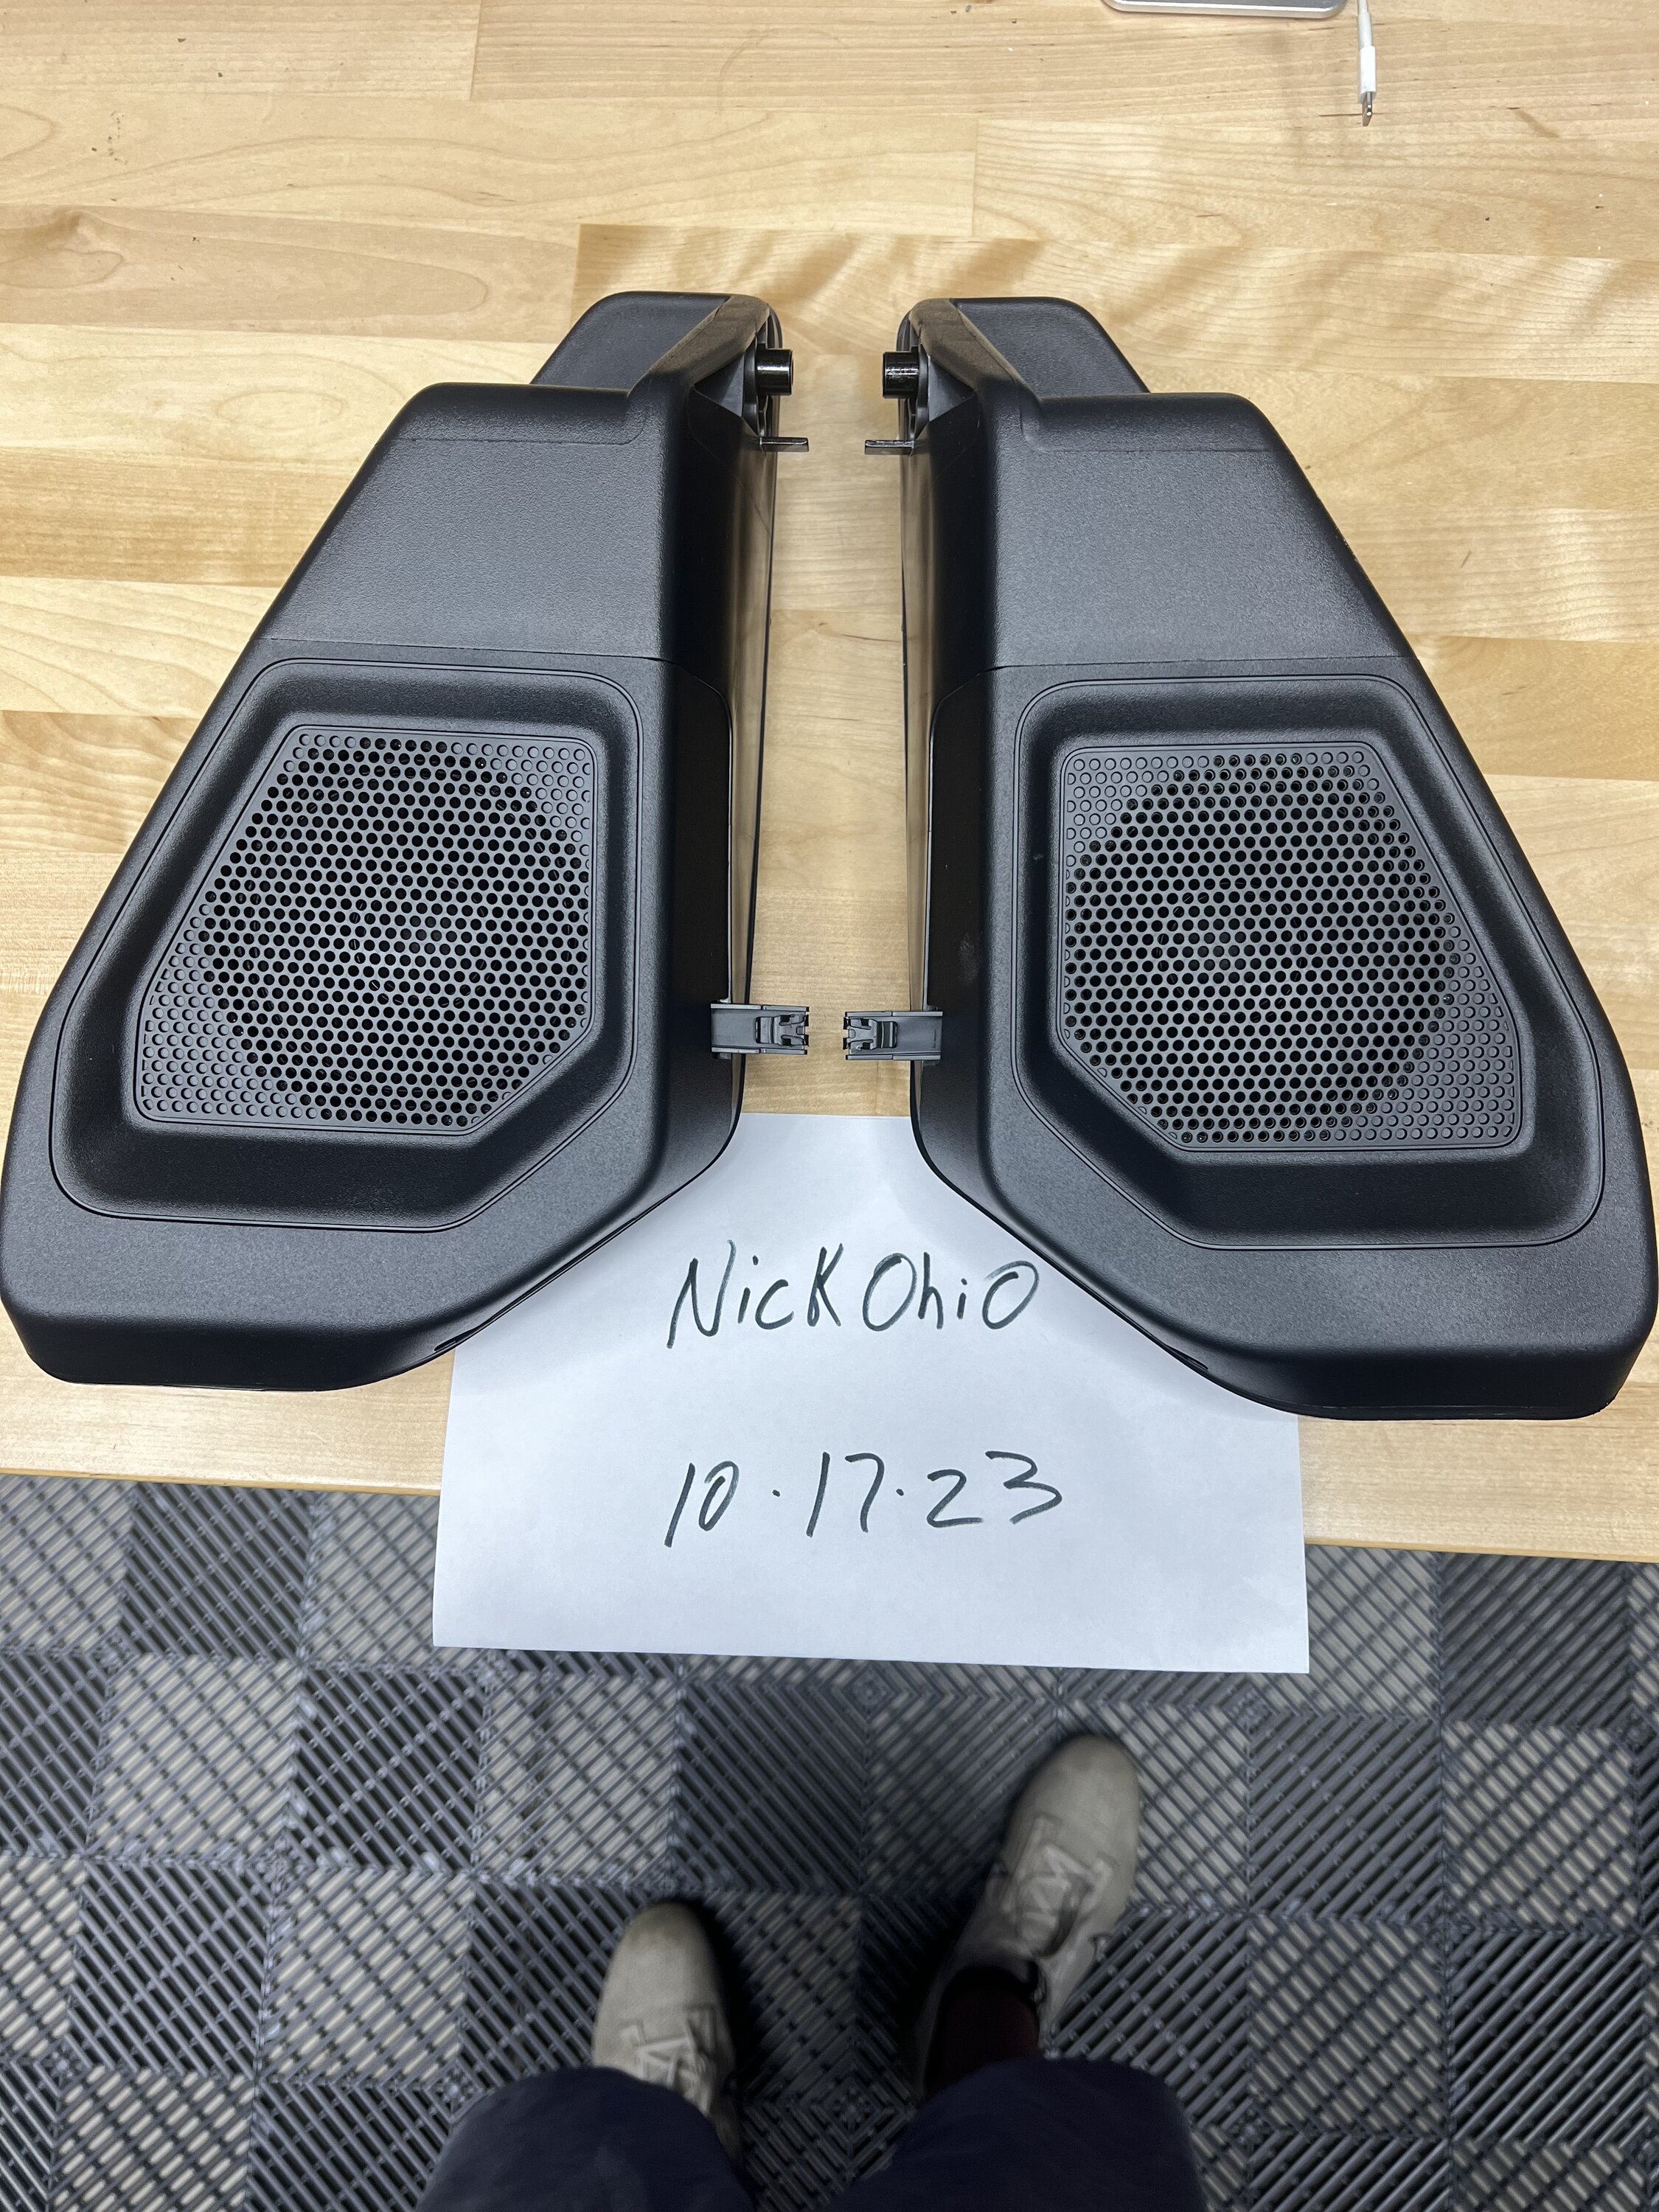 Ford Bronco B&O Speakers, barely used - $50 for all tempImagenDYGNZ